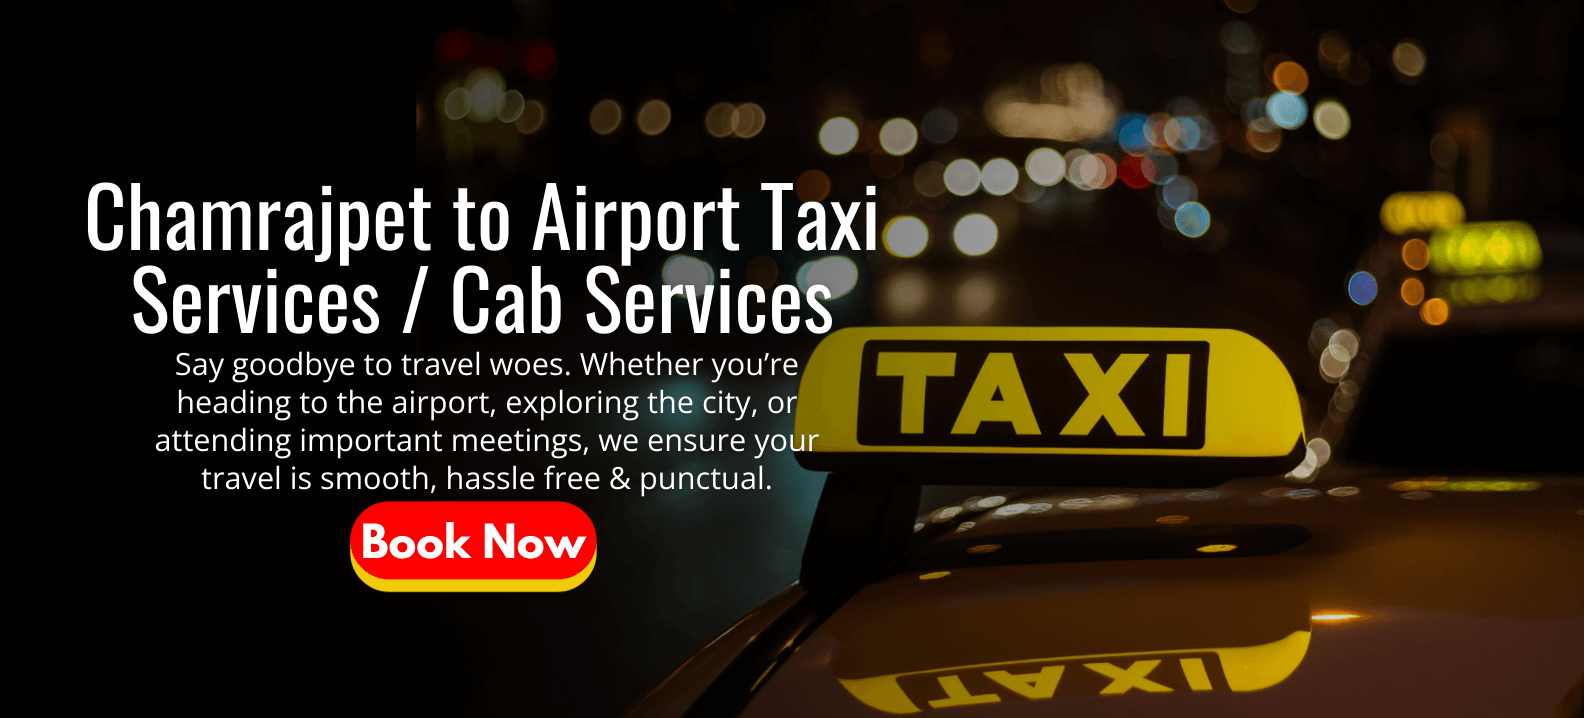 Chamrajpet Bazar to Airport Taxi Services _ Cab Services